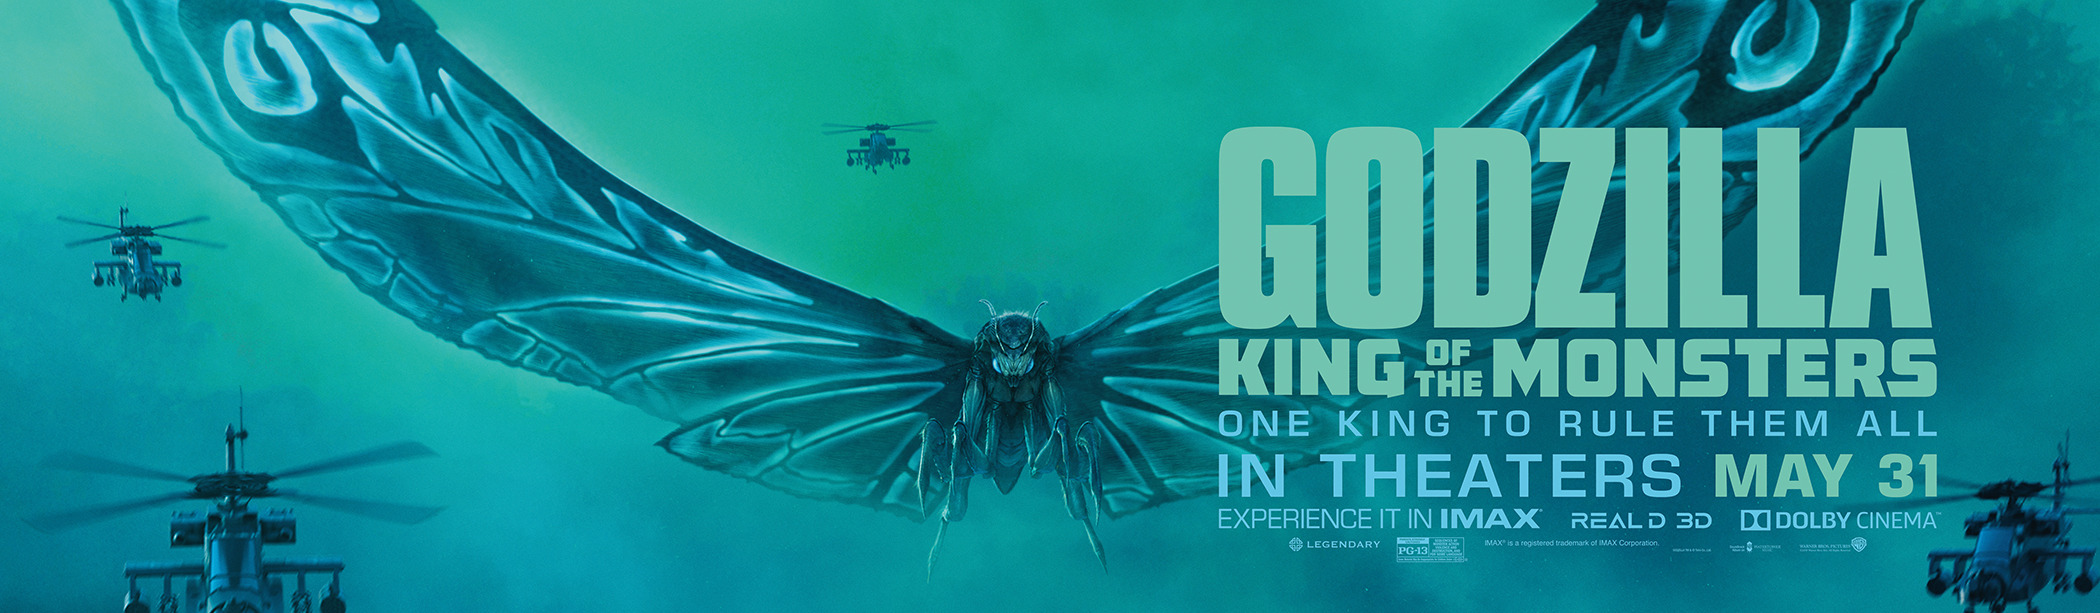 Mega Sized Movie Poster Image for Godzilla: King of the Monsters (#21 of 27)